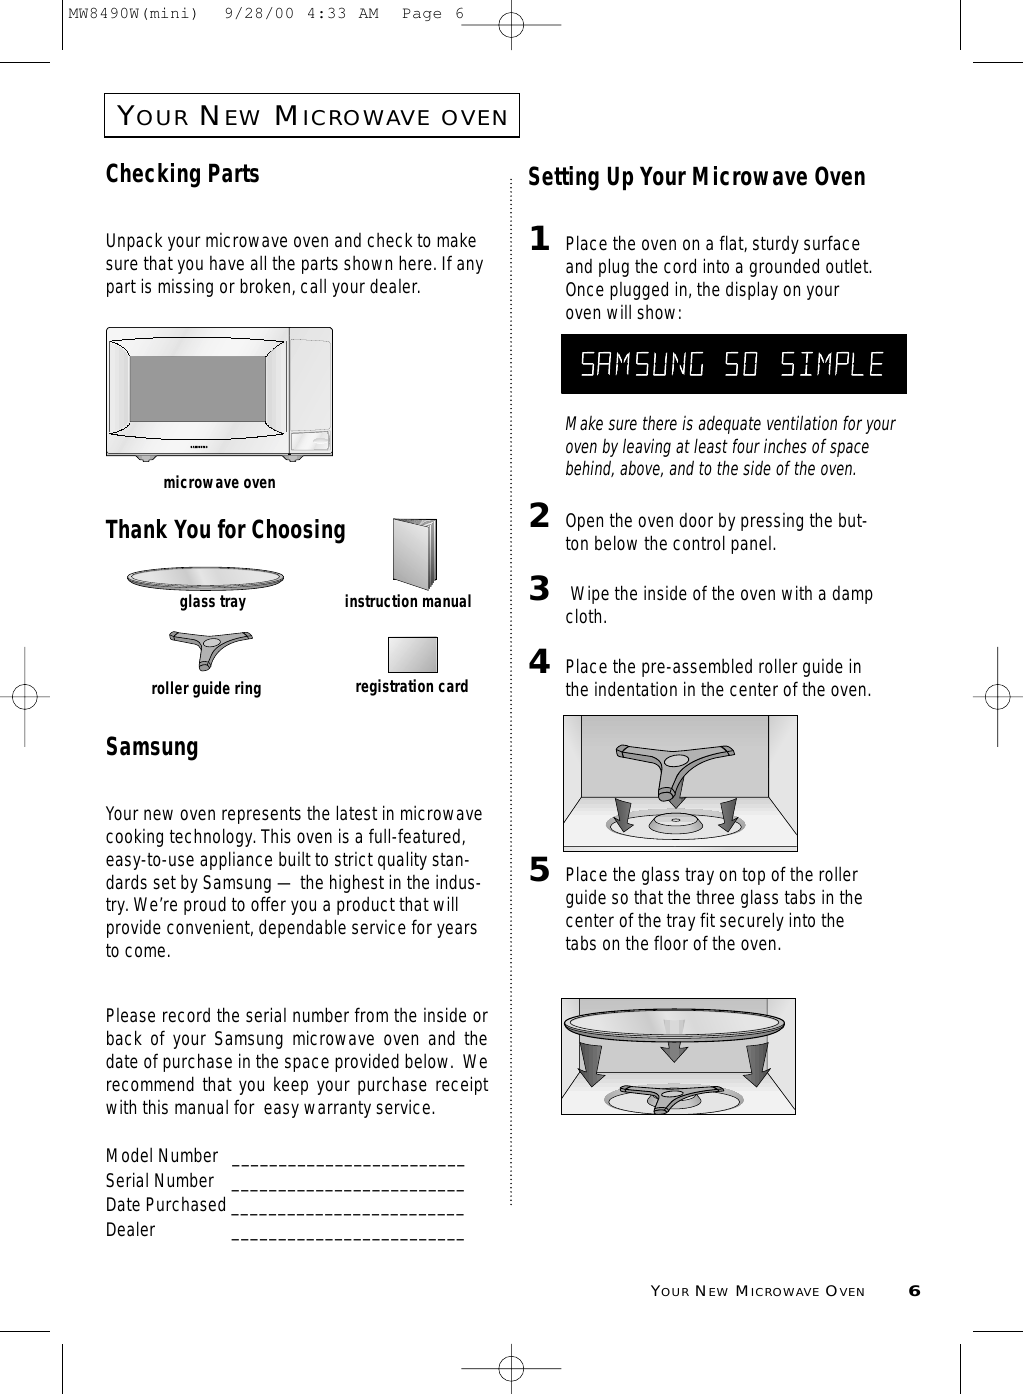 YOURNEWMICROWAVE OVEN6YOURNEWMICROWAVEOVENChecking PartsUnpack your microwave oven and check to makesure that you have all the parts shown here. If anypart is missing or broken, call your dealer.Thank You for ChoosingSamsungYour new oven represents the latest in microwavecooking technology. This oven is a full-featured,easy-to-use appliance built to strict quality stan-dards set by Samsung — the highest in the indus-try. We’re proud to offer you a product that willprovide convenient, dependable service for yearsto come. Please record the serial number from the inside orback of your Samsung microwave oven and thedate of purchase in the space provided below.  Werecommend that you keep your purchase receiptwith this manual for  easy warranty service. Model Number   _________________________Serial Number _________________________Date Purchased _________________________Dealer _________________________Setting Up Your Microwave Oven1Place the oven on a flat, sturdy surfaceand plug the cord into a grounded outlet.Once plugged in, the display on youroven will show:Make sure there is adequate ventilation for youroven by leaving at least four inches of spacebehind, above, and to the side of the oven. 2Open the oven door by pressing the but-ton below the control panel.3Wipe the inside of the oven with a dampcloth.4Place the pre-assembled roller guide inthe indentation in the center of the oven.5Place the glass tray on top of the rollerguide so that the three glass tabs in thecenter of the tray fit securely into thetabs on the floor of the oven.microwave ovenglass trayroller guide ringinstruction manualregistration cardMW8490W(mini)  9/28/00 4:33 AM  Page 6